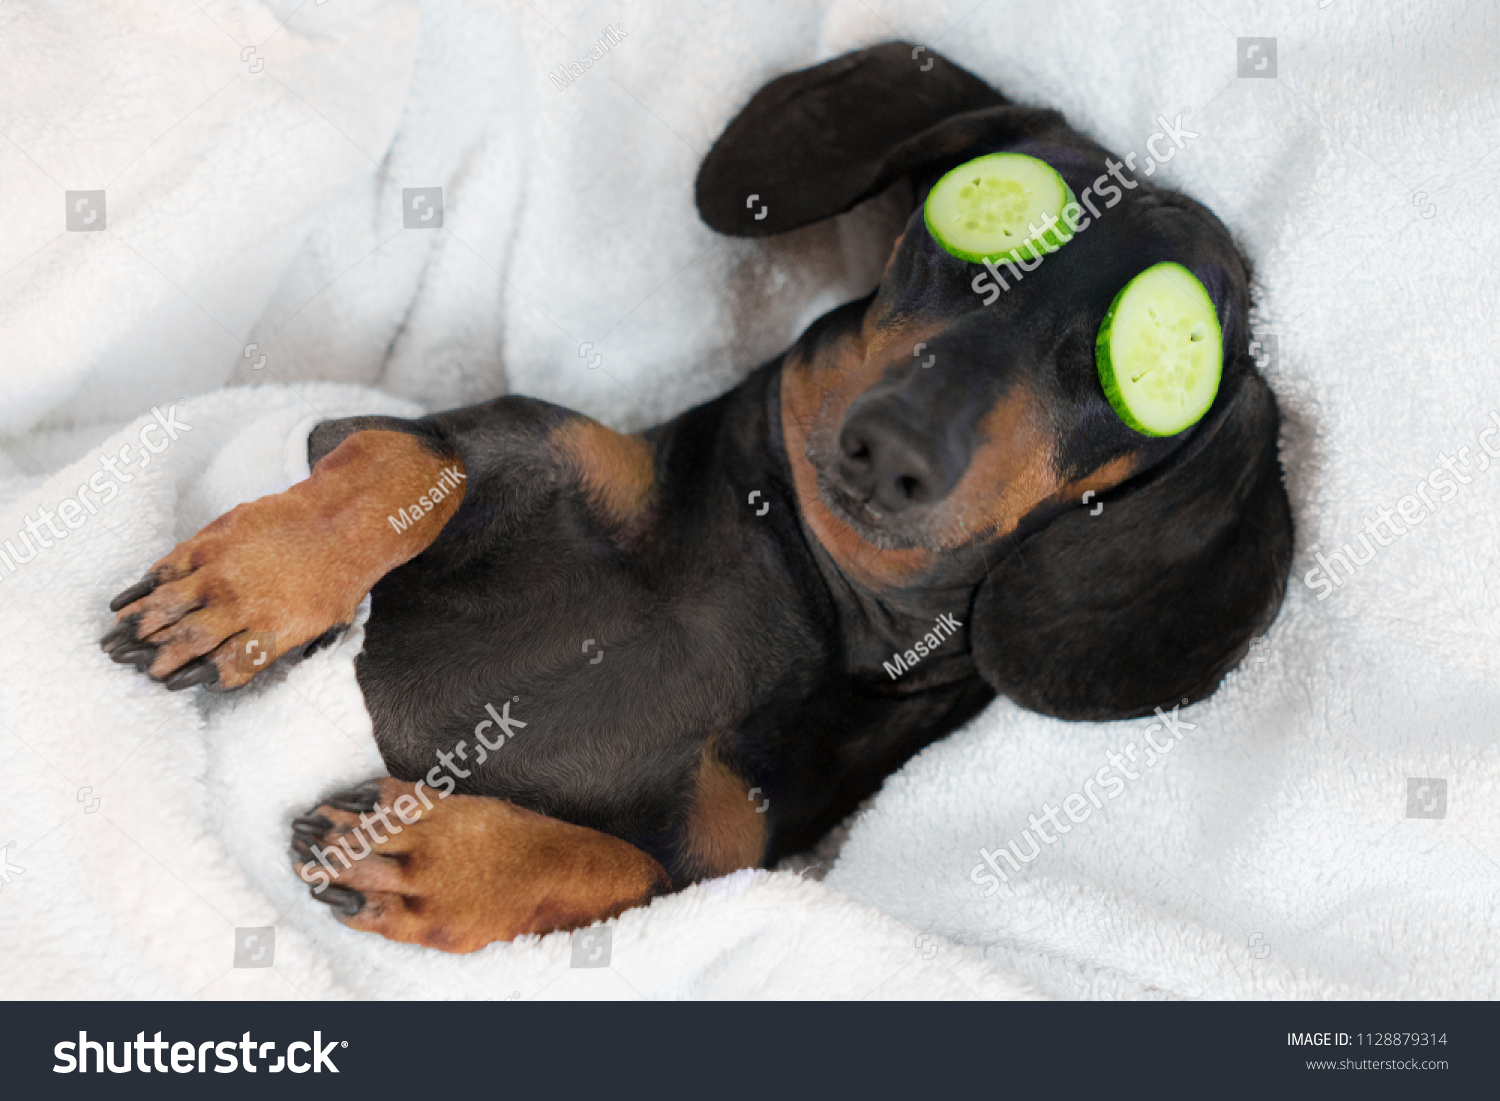 dog dachshund, black and tan, relaxed from spa procedures on face with cucumber, covered with a towel #1128879314